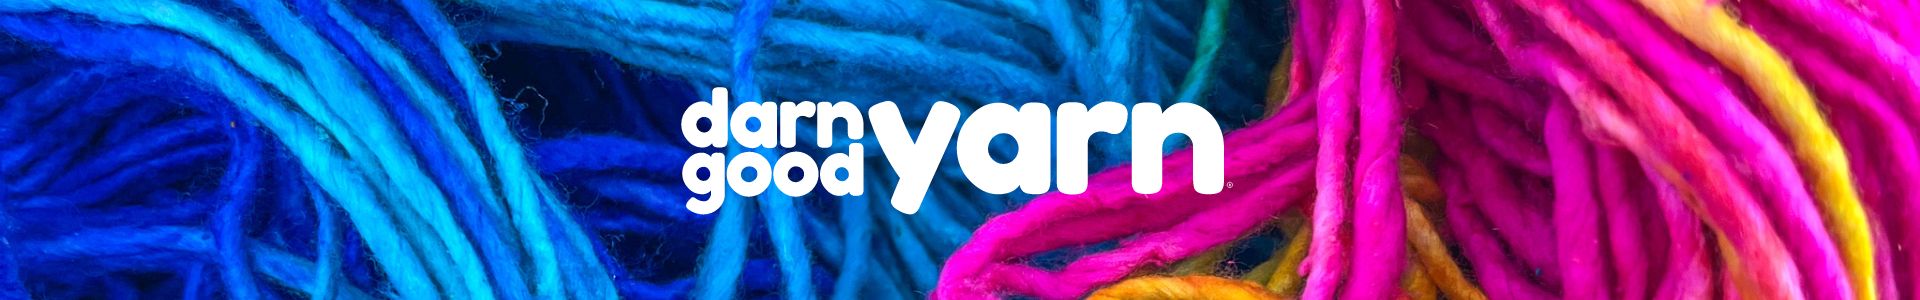 Darn Good Yarn is naturally sustainable and at JOANN